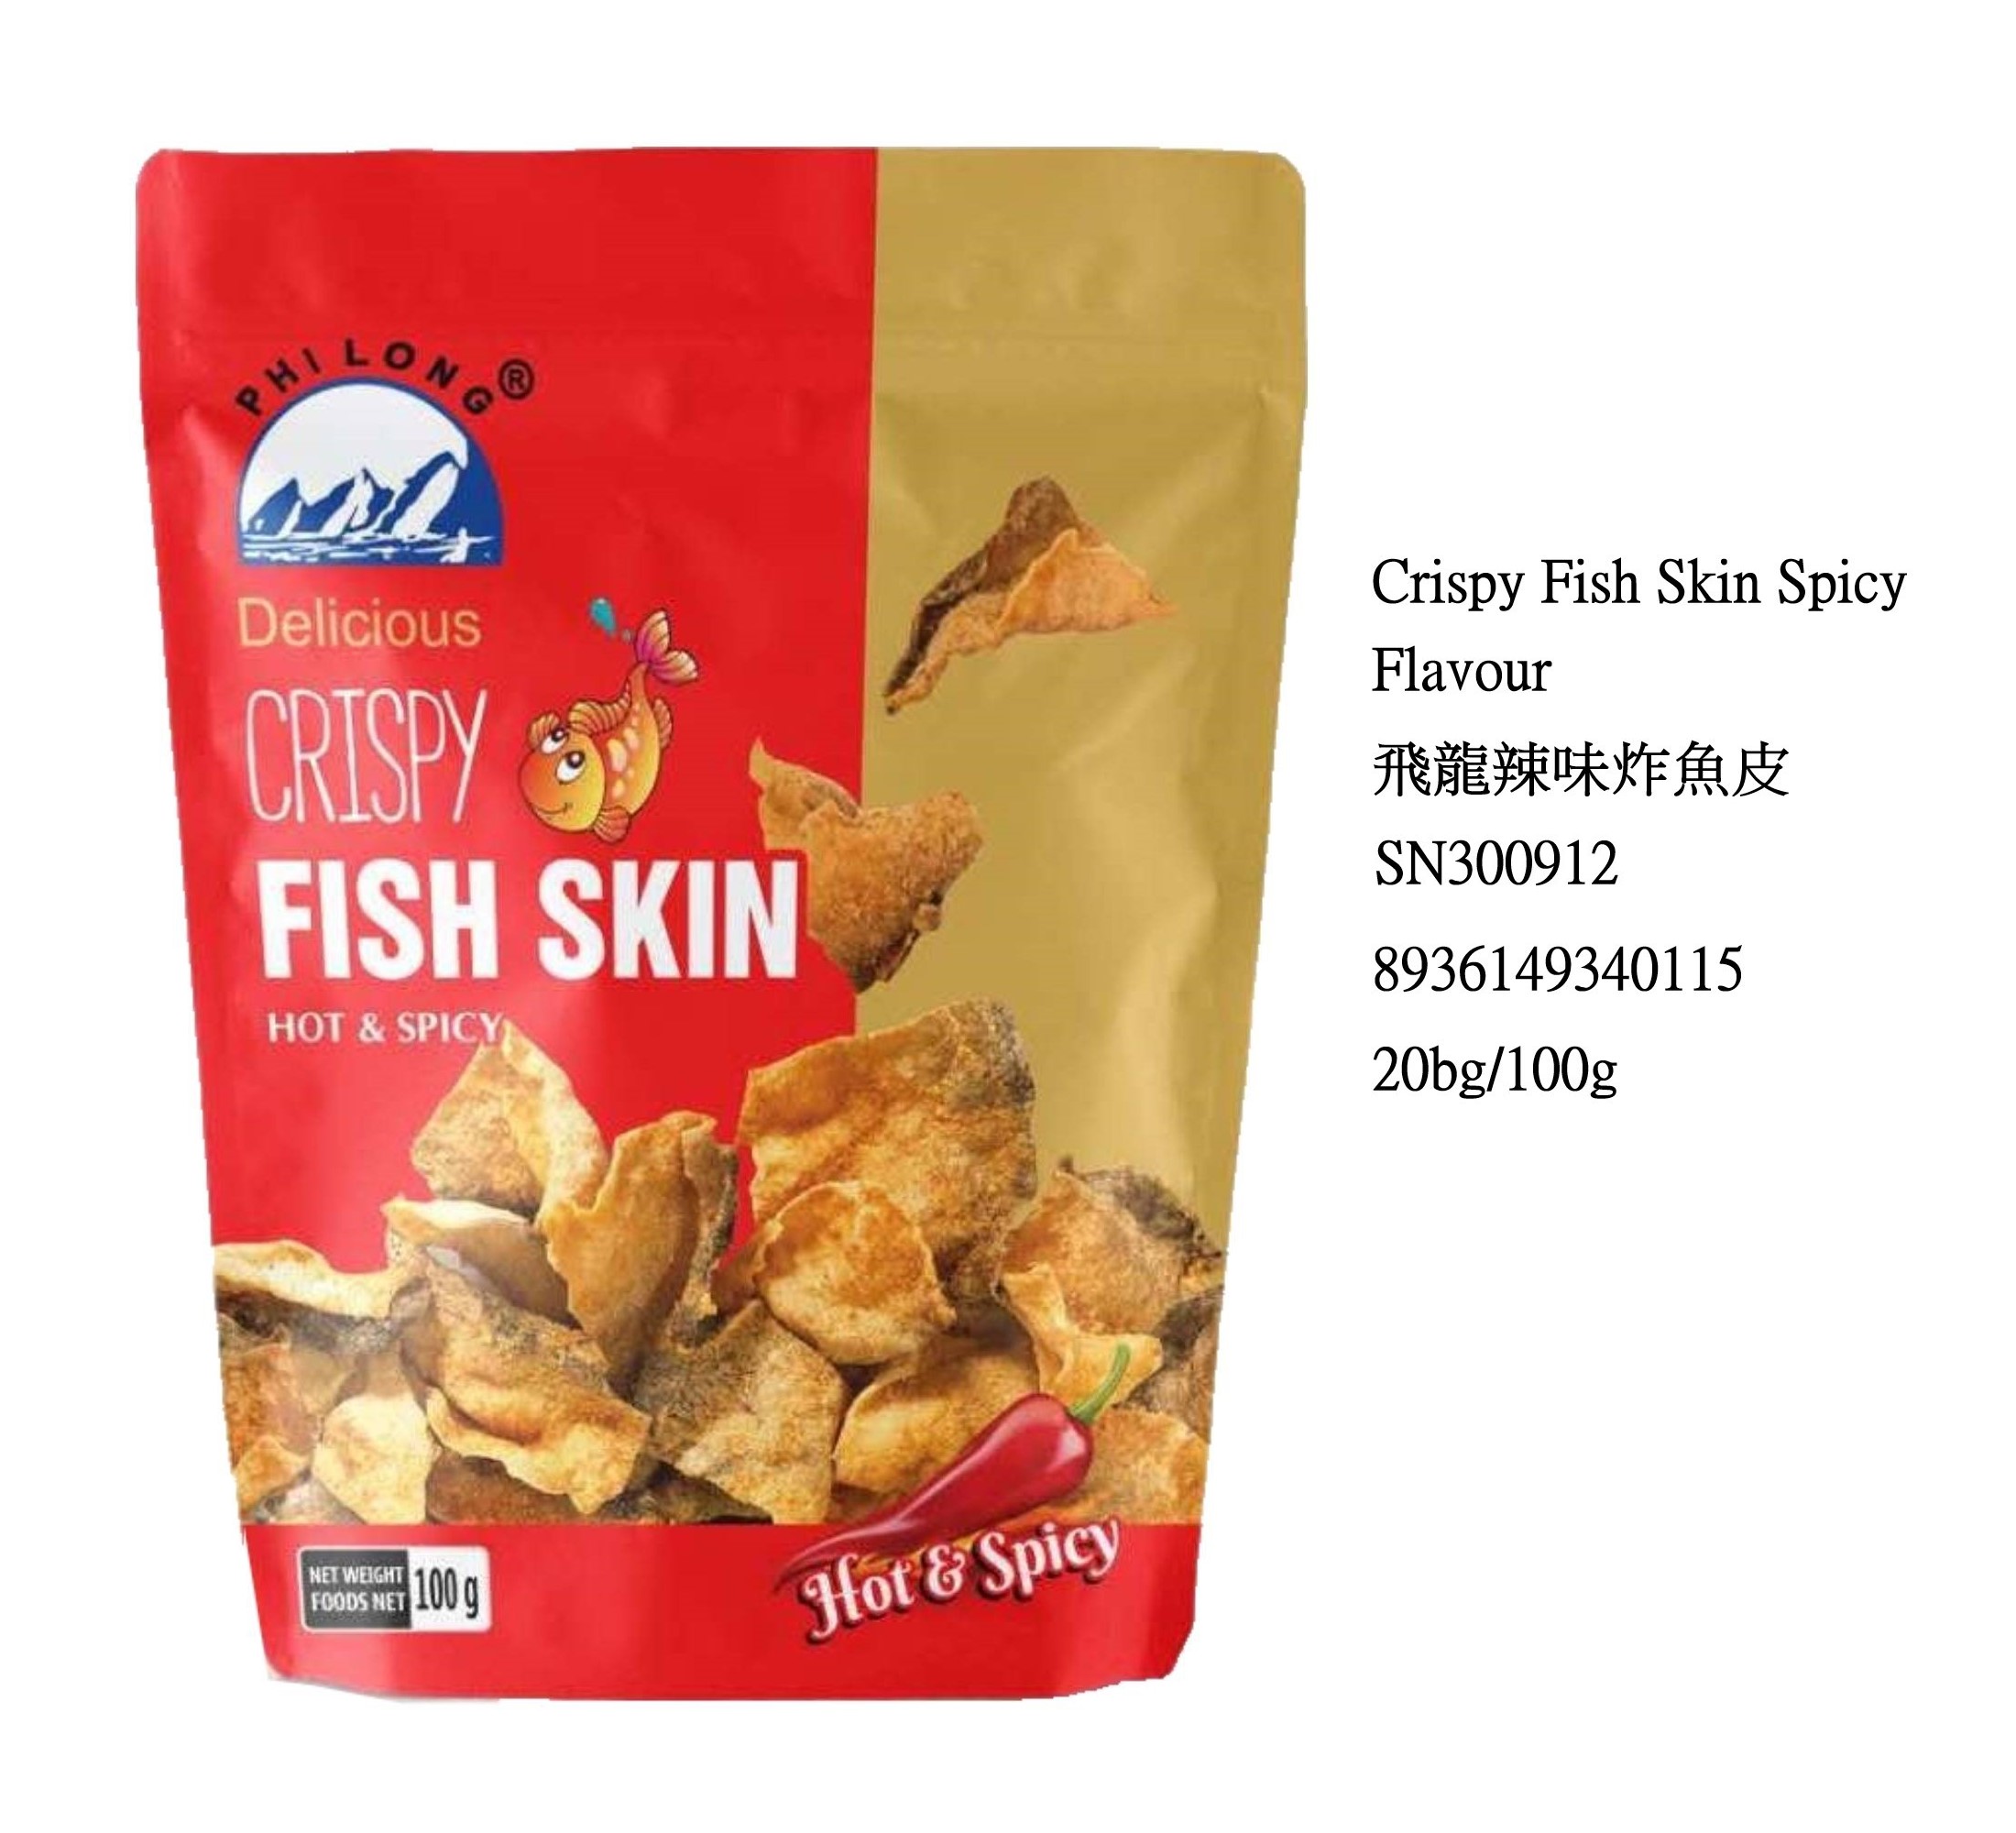 PHI LONG CRISPY FISH SKIN SPICY FLAVOUR SN300912